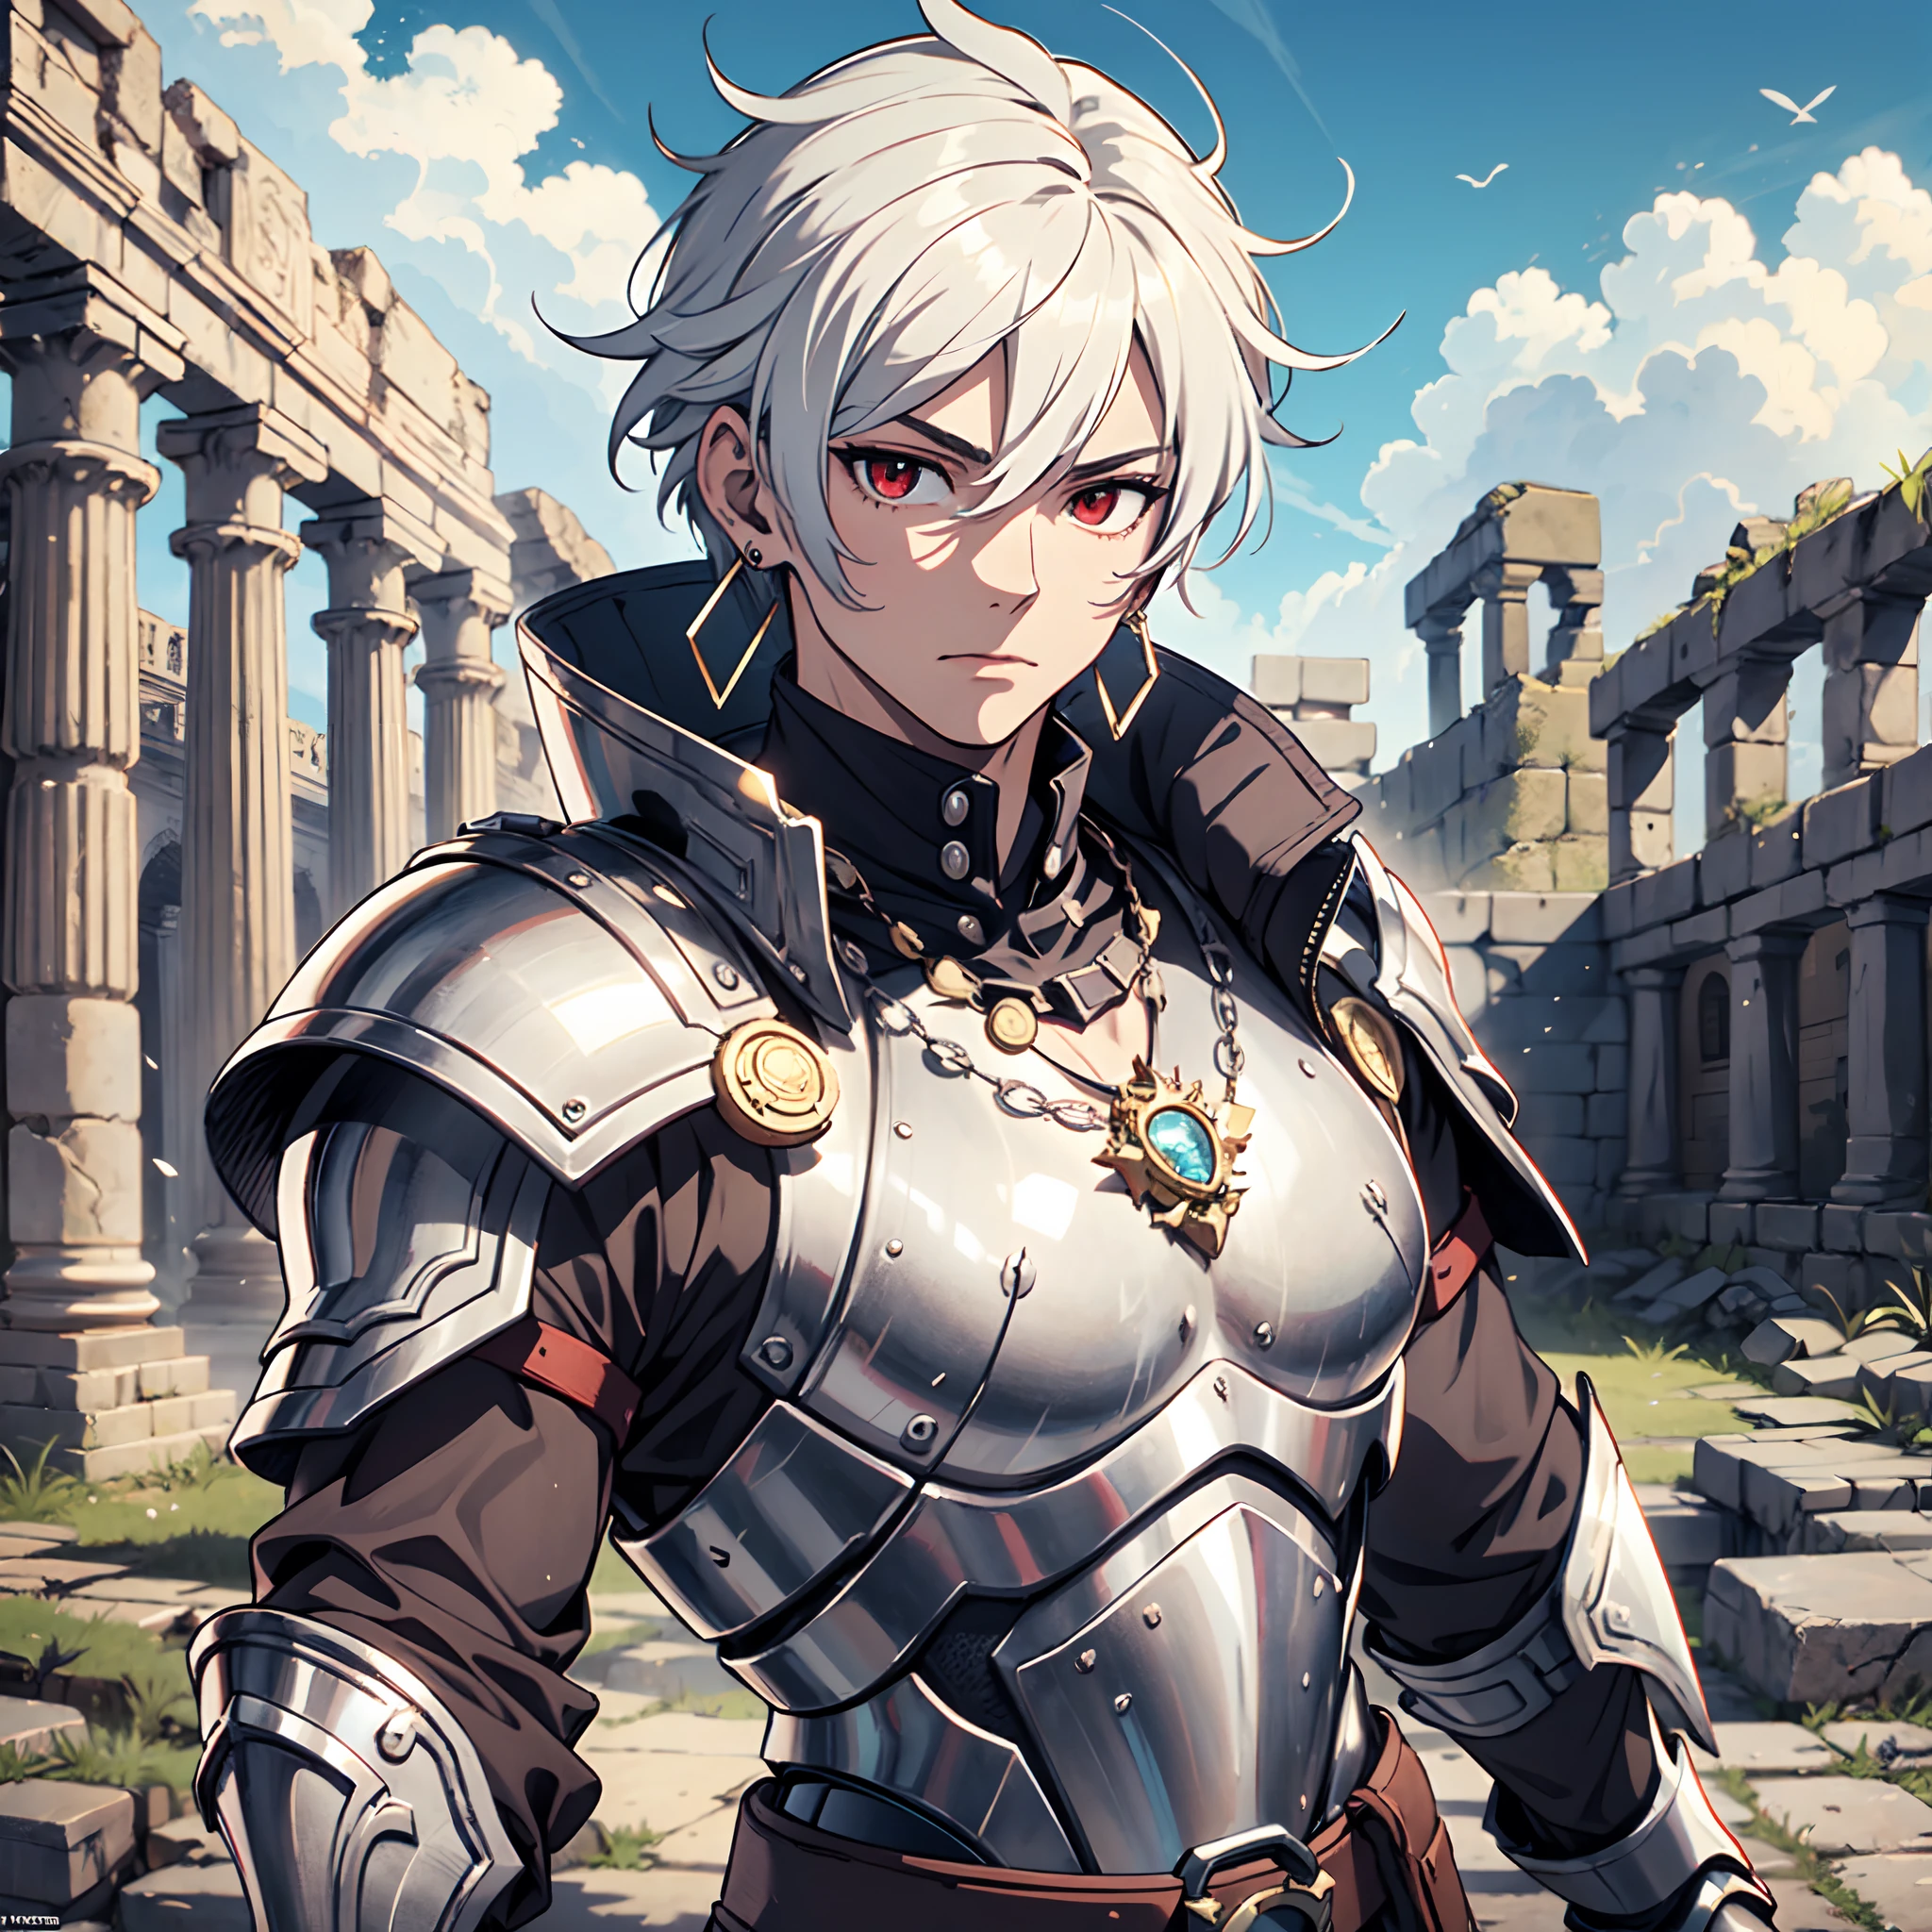 128K Ultra High Definition,
128K Ultra High Quality,
128K Ultra High Resolution,
128K Resolution,
Hyper Detailed,
Hyper Quality,
Hyper Definition,
Perfectly Detailed,
Perfectly Designed,
Masterpiece,
1 Boy,
Anime,
Handsome,
White Hair,
Red Eyes,
Wearing Earrings,
Wearing Necklace,
Armored With Spartan Armor,
Ancient Ruins Background,